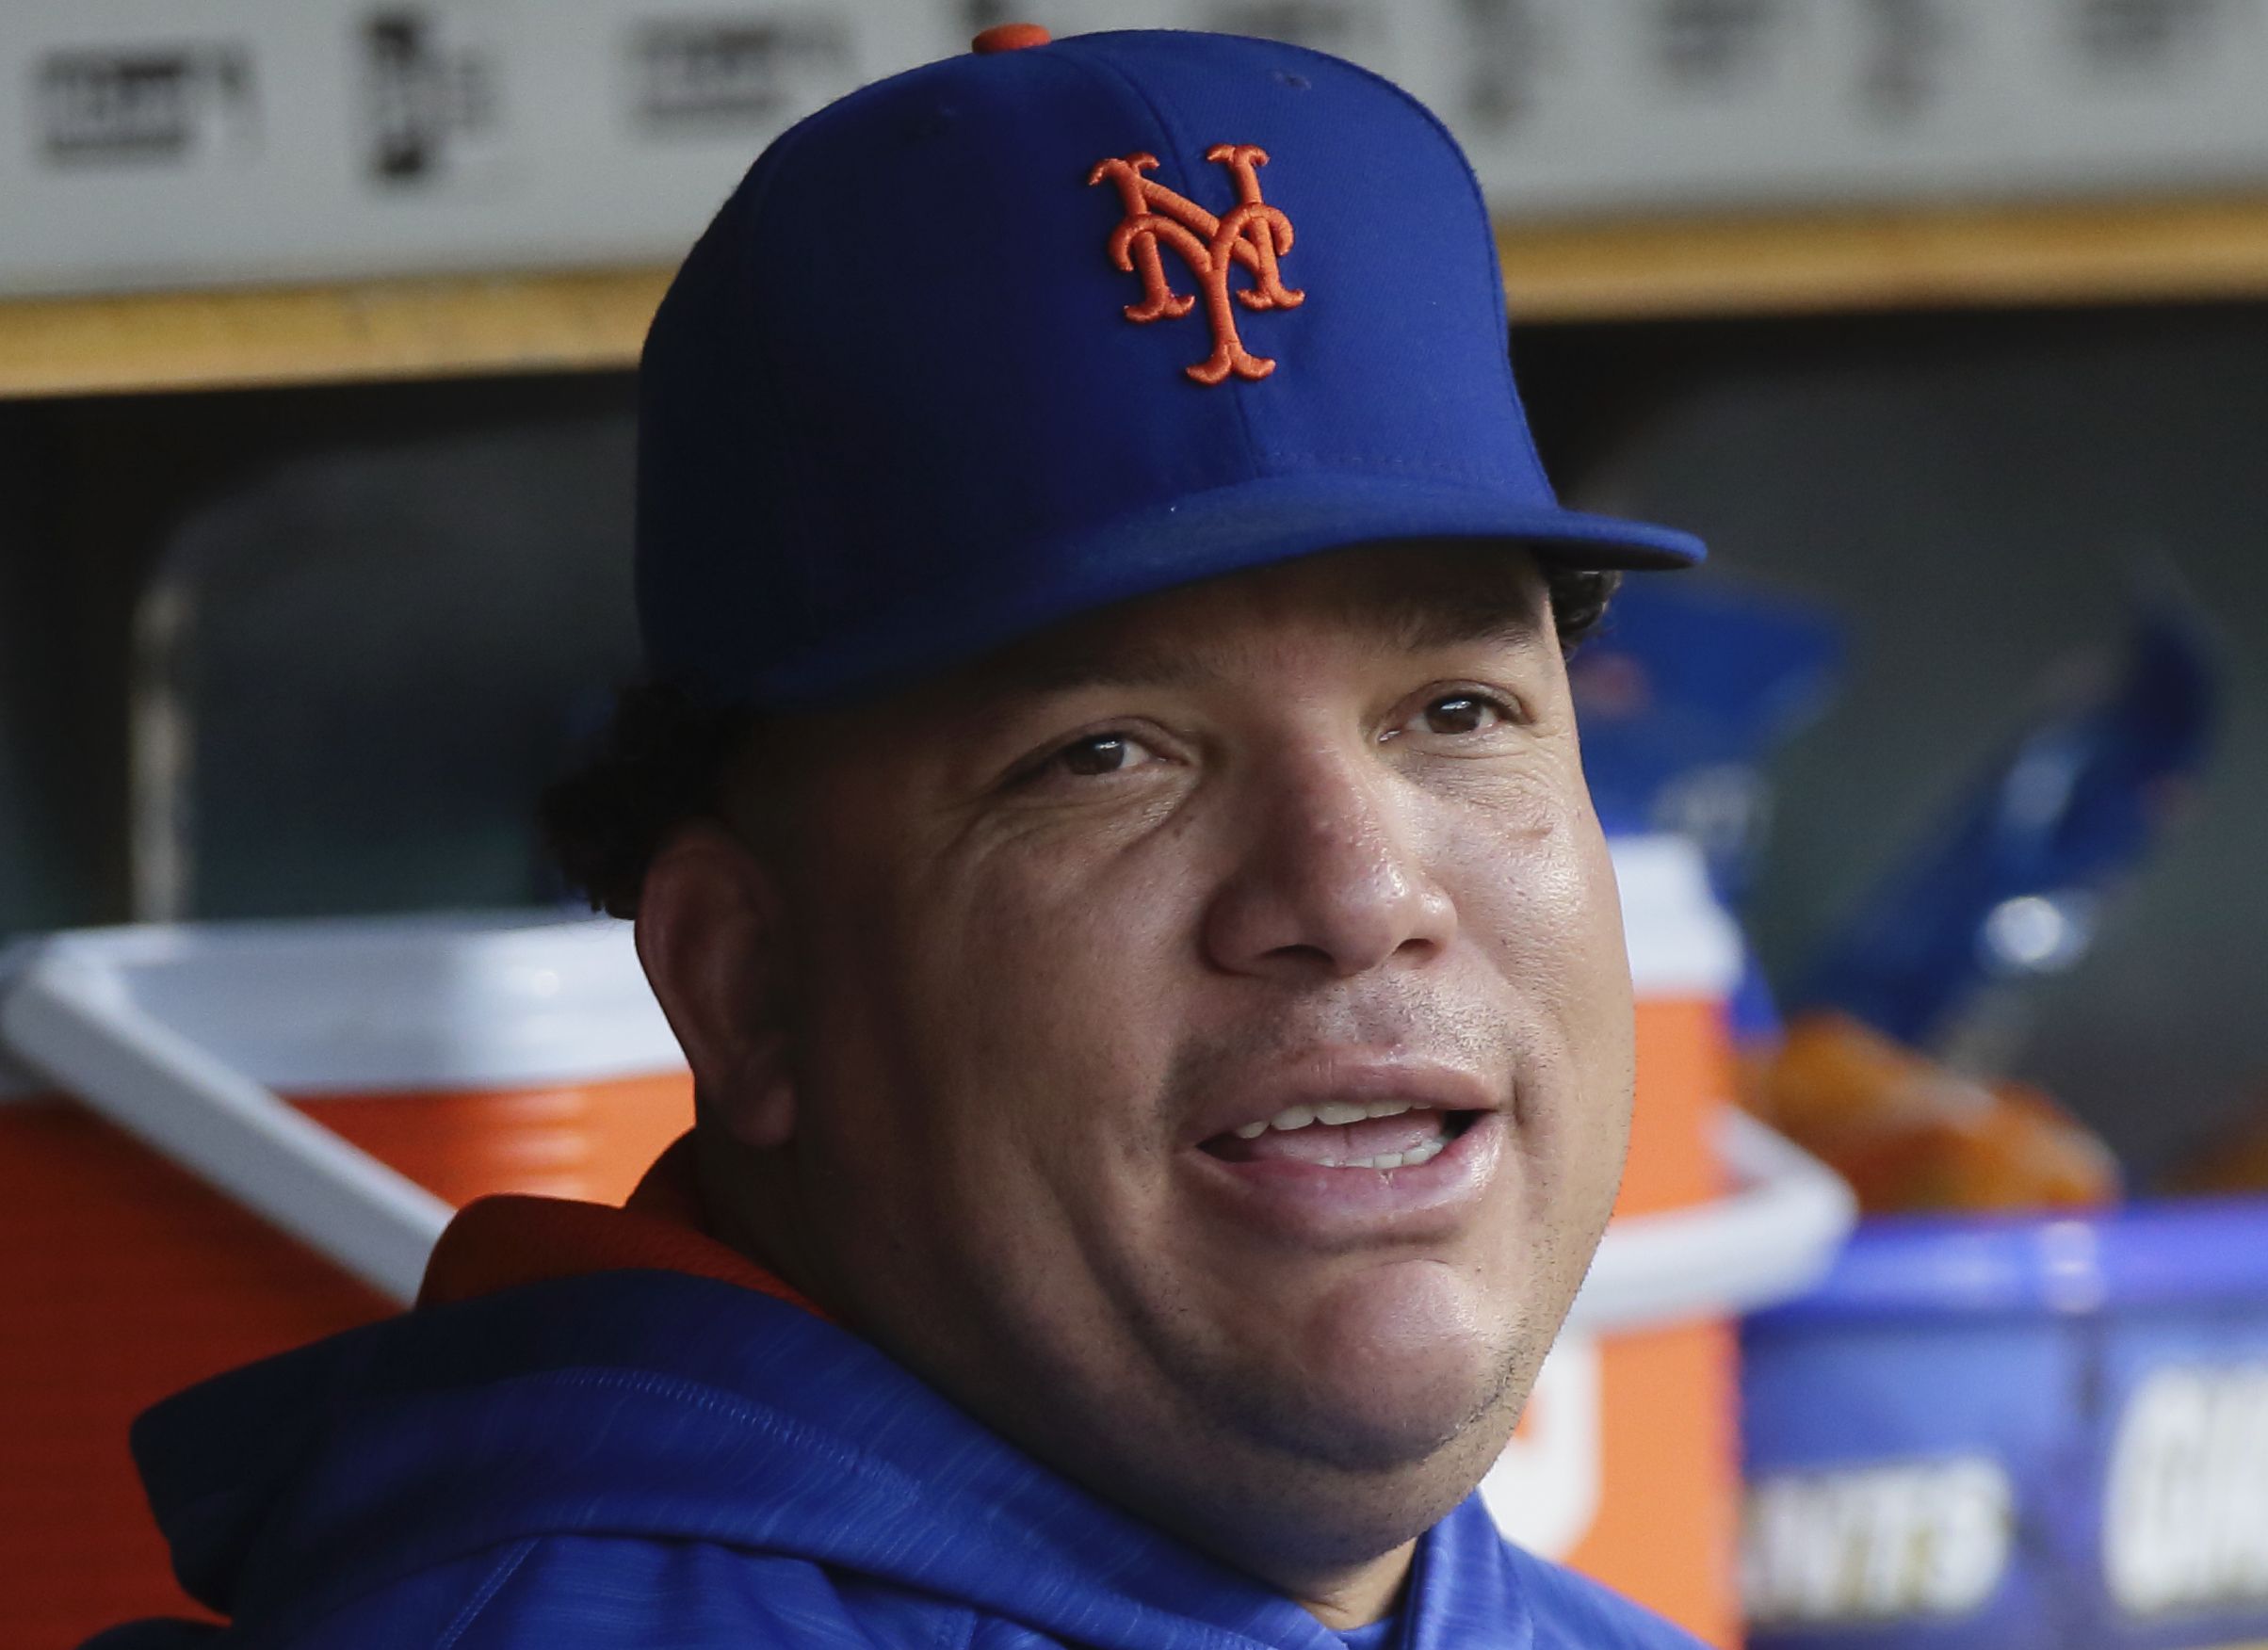 Bartolo Colon rejoining Mets at 47 would be as bad as calling up